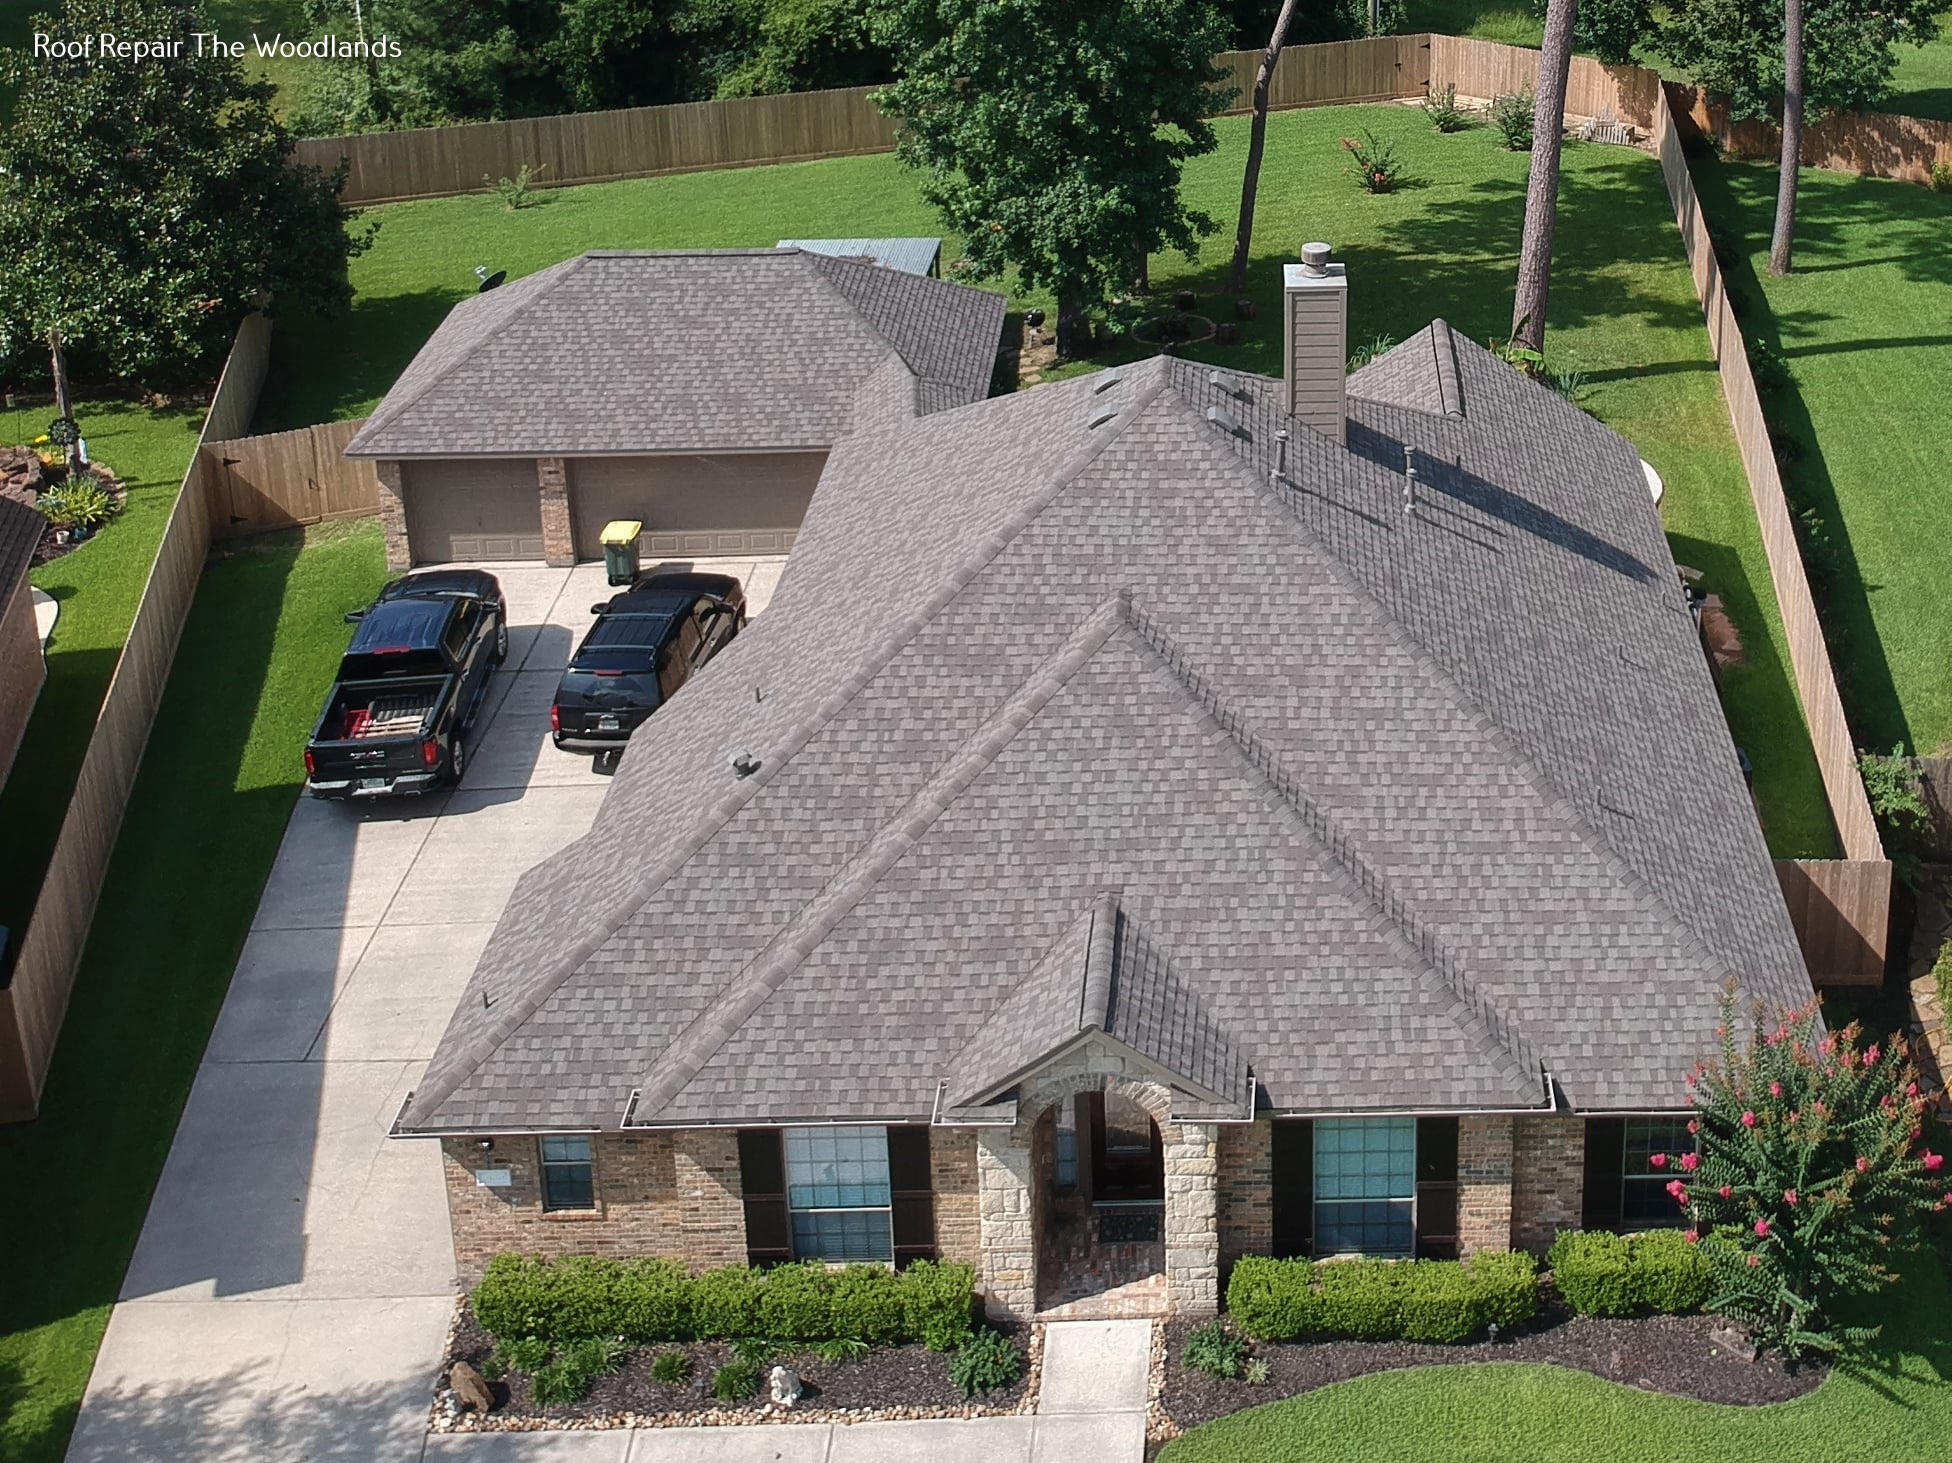 Elite Roofers Highlights Why Clients Should Choose Them For Quality Roofing Services